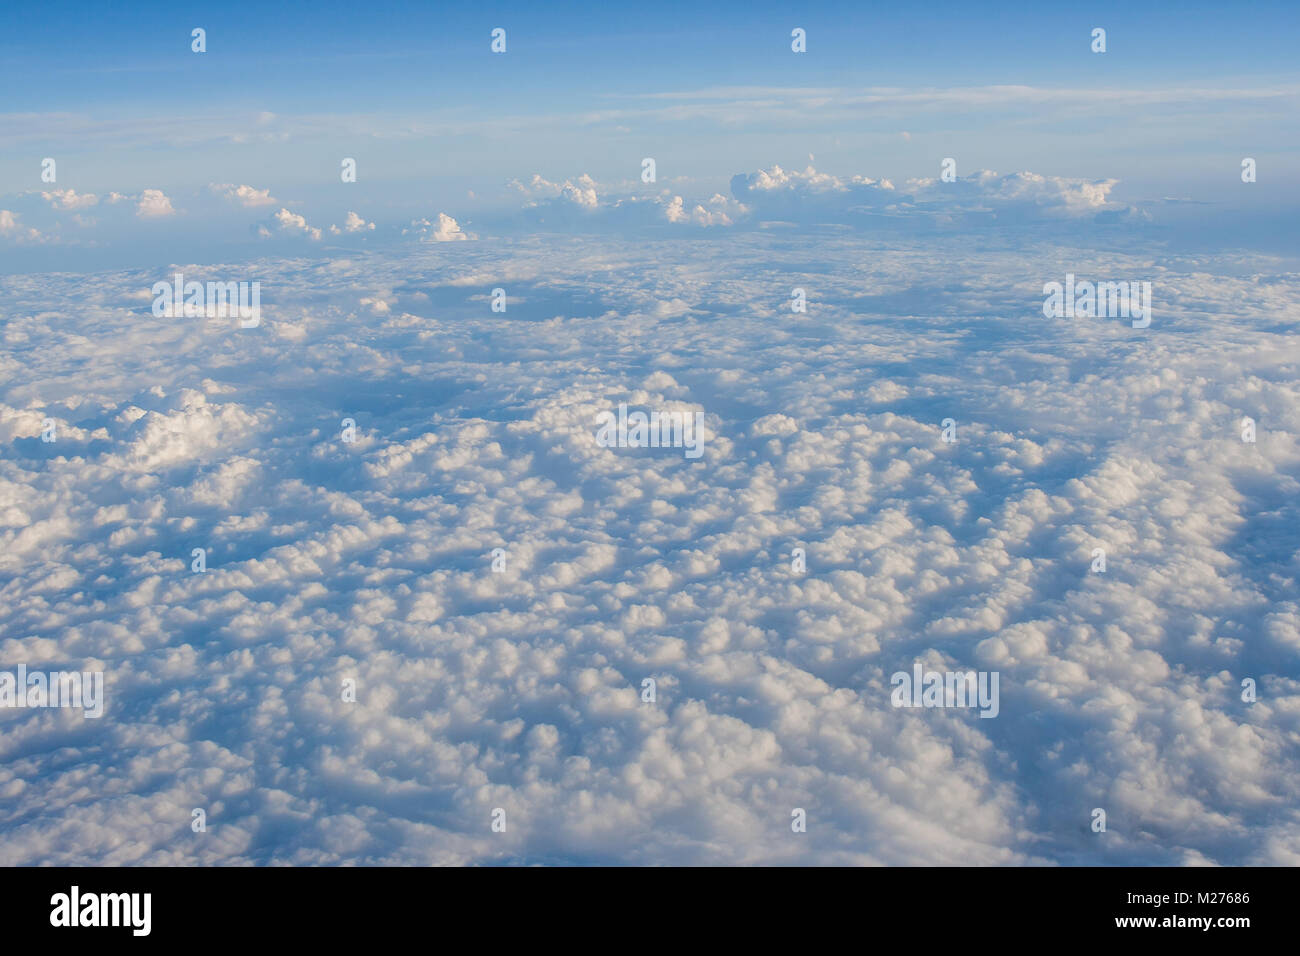 Clouds and blue sky view out from window of airplane fying over earth ground. Stock Photo